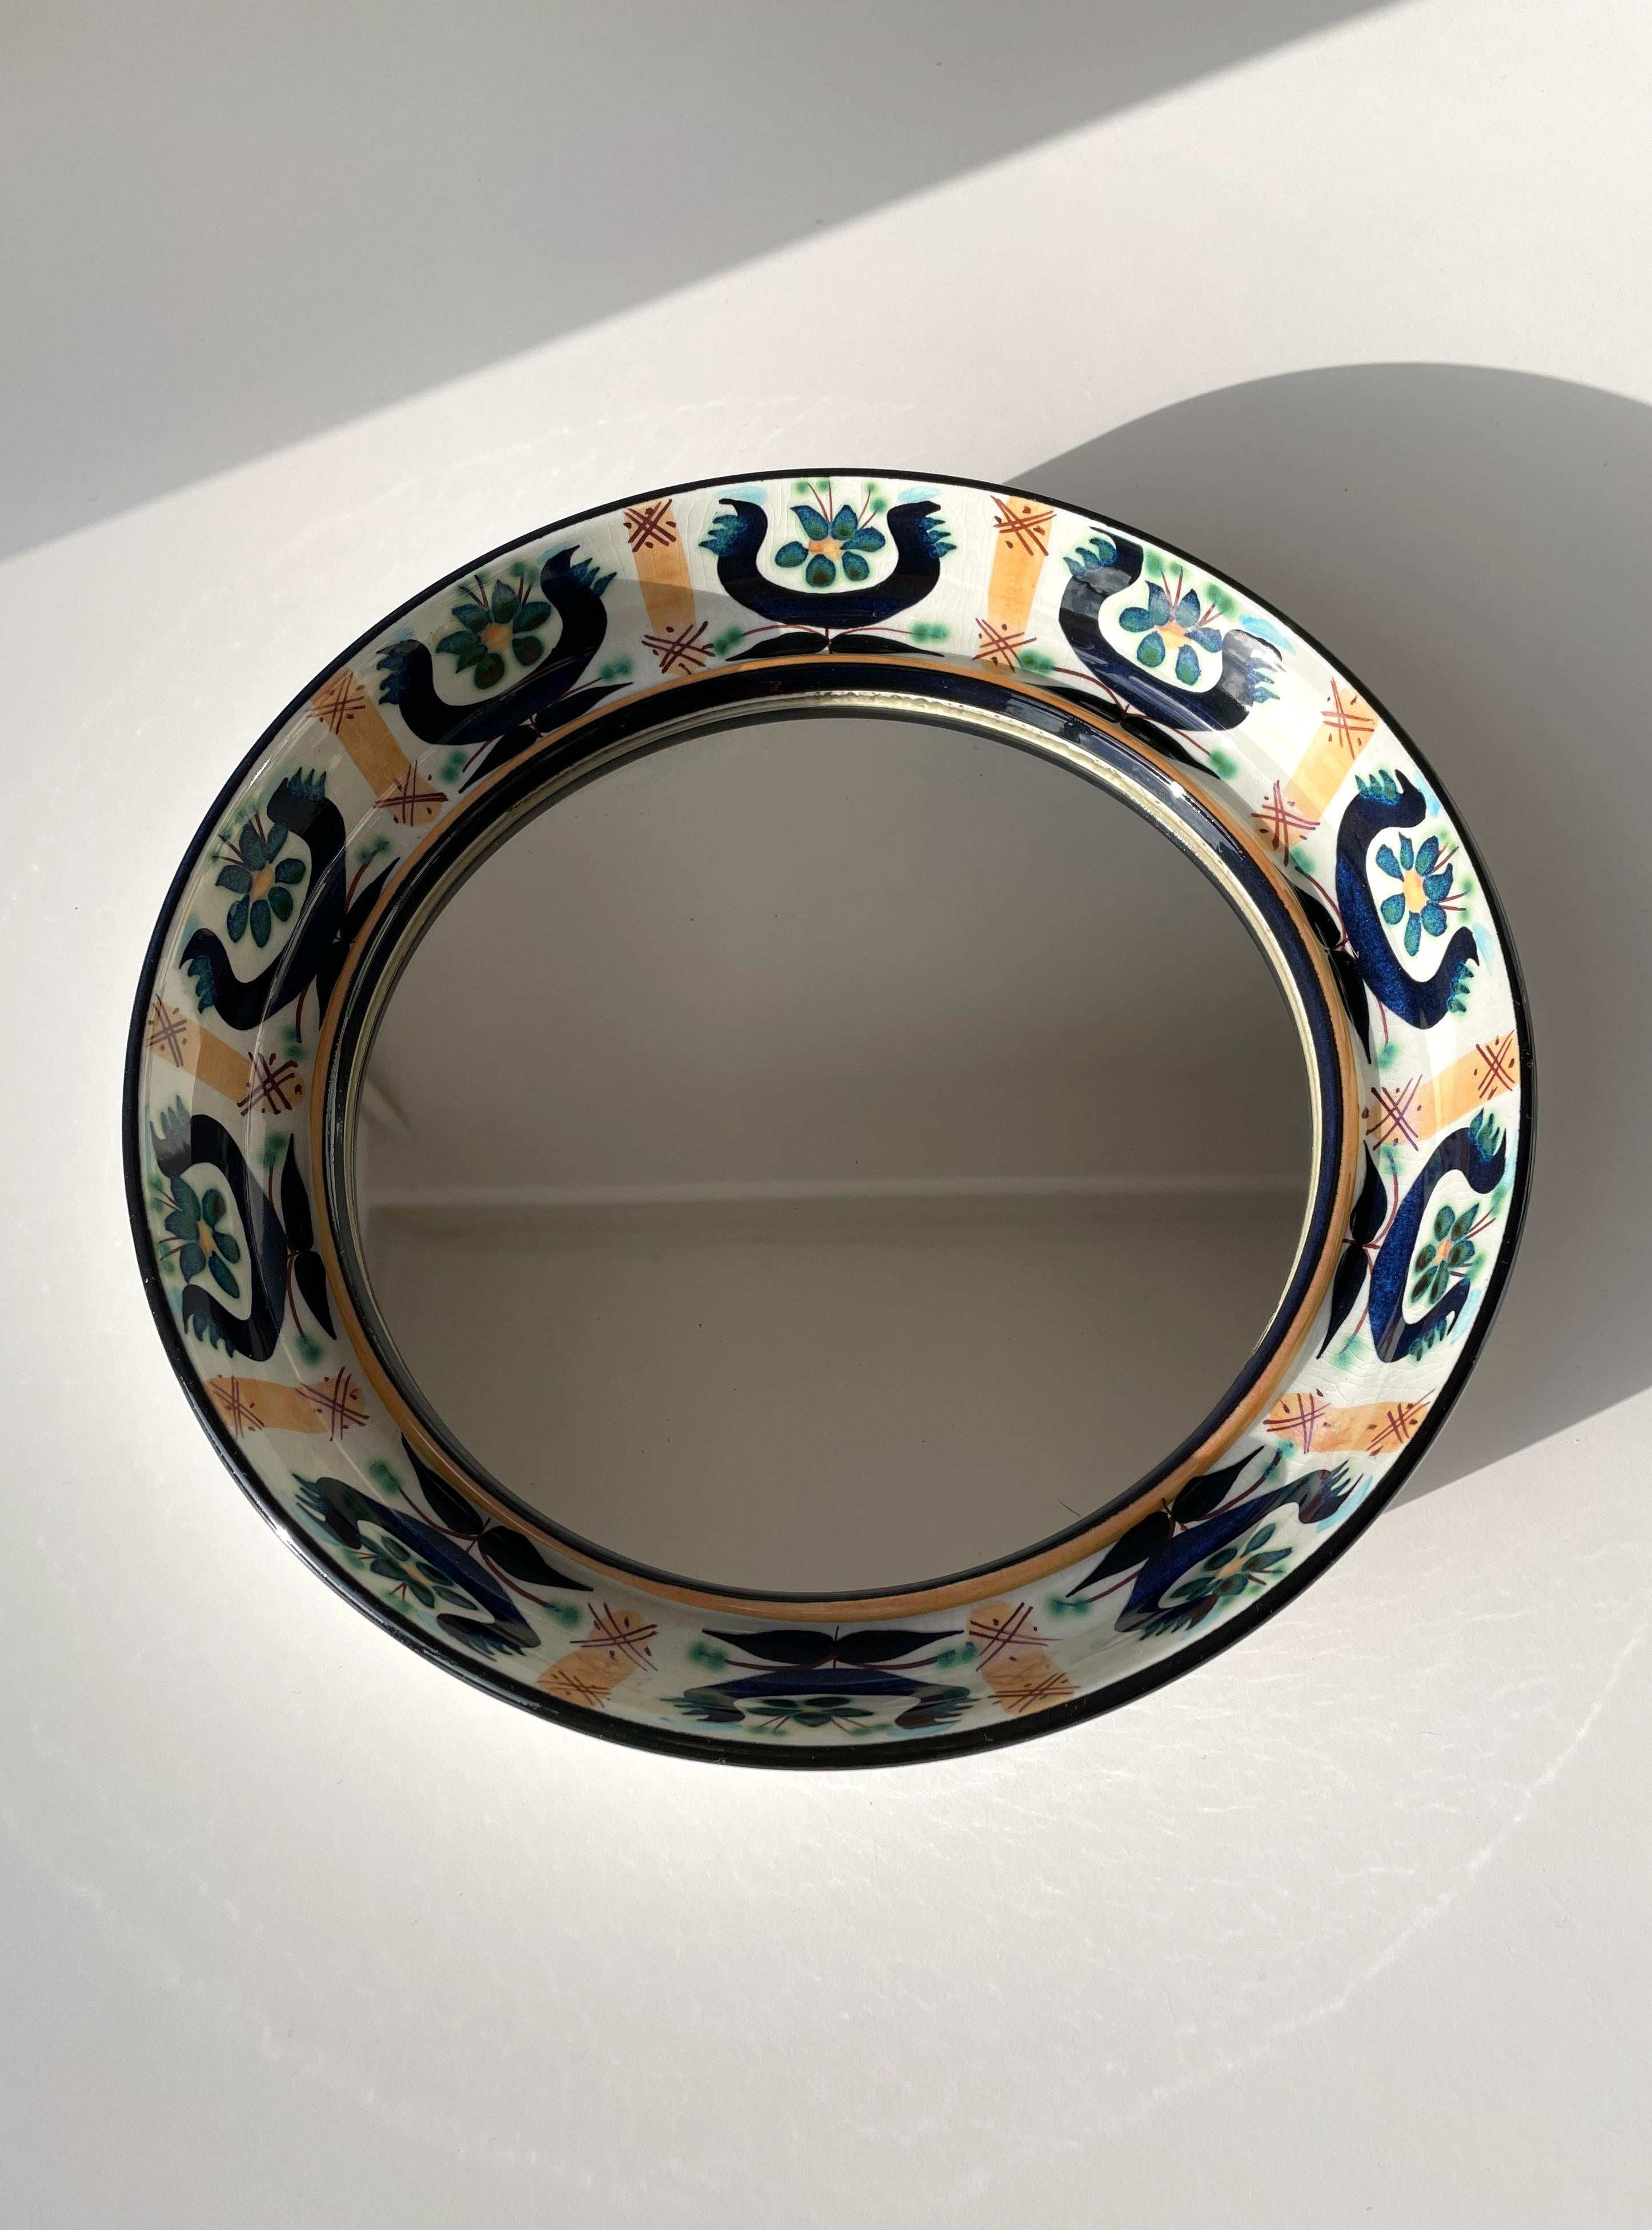 Danish Mid-Century Modern faience frame mirror by Marianne Johanson for the Royal Copenhagen Tenera series. Hand-painted floral organic decor in blue, aqua, green and peach colored glaze on white base. Signed and stamped on top part. Beautiful